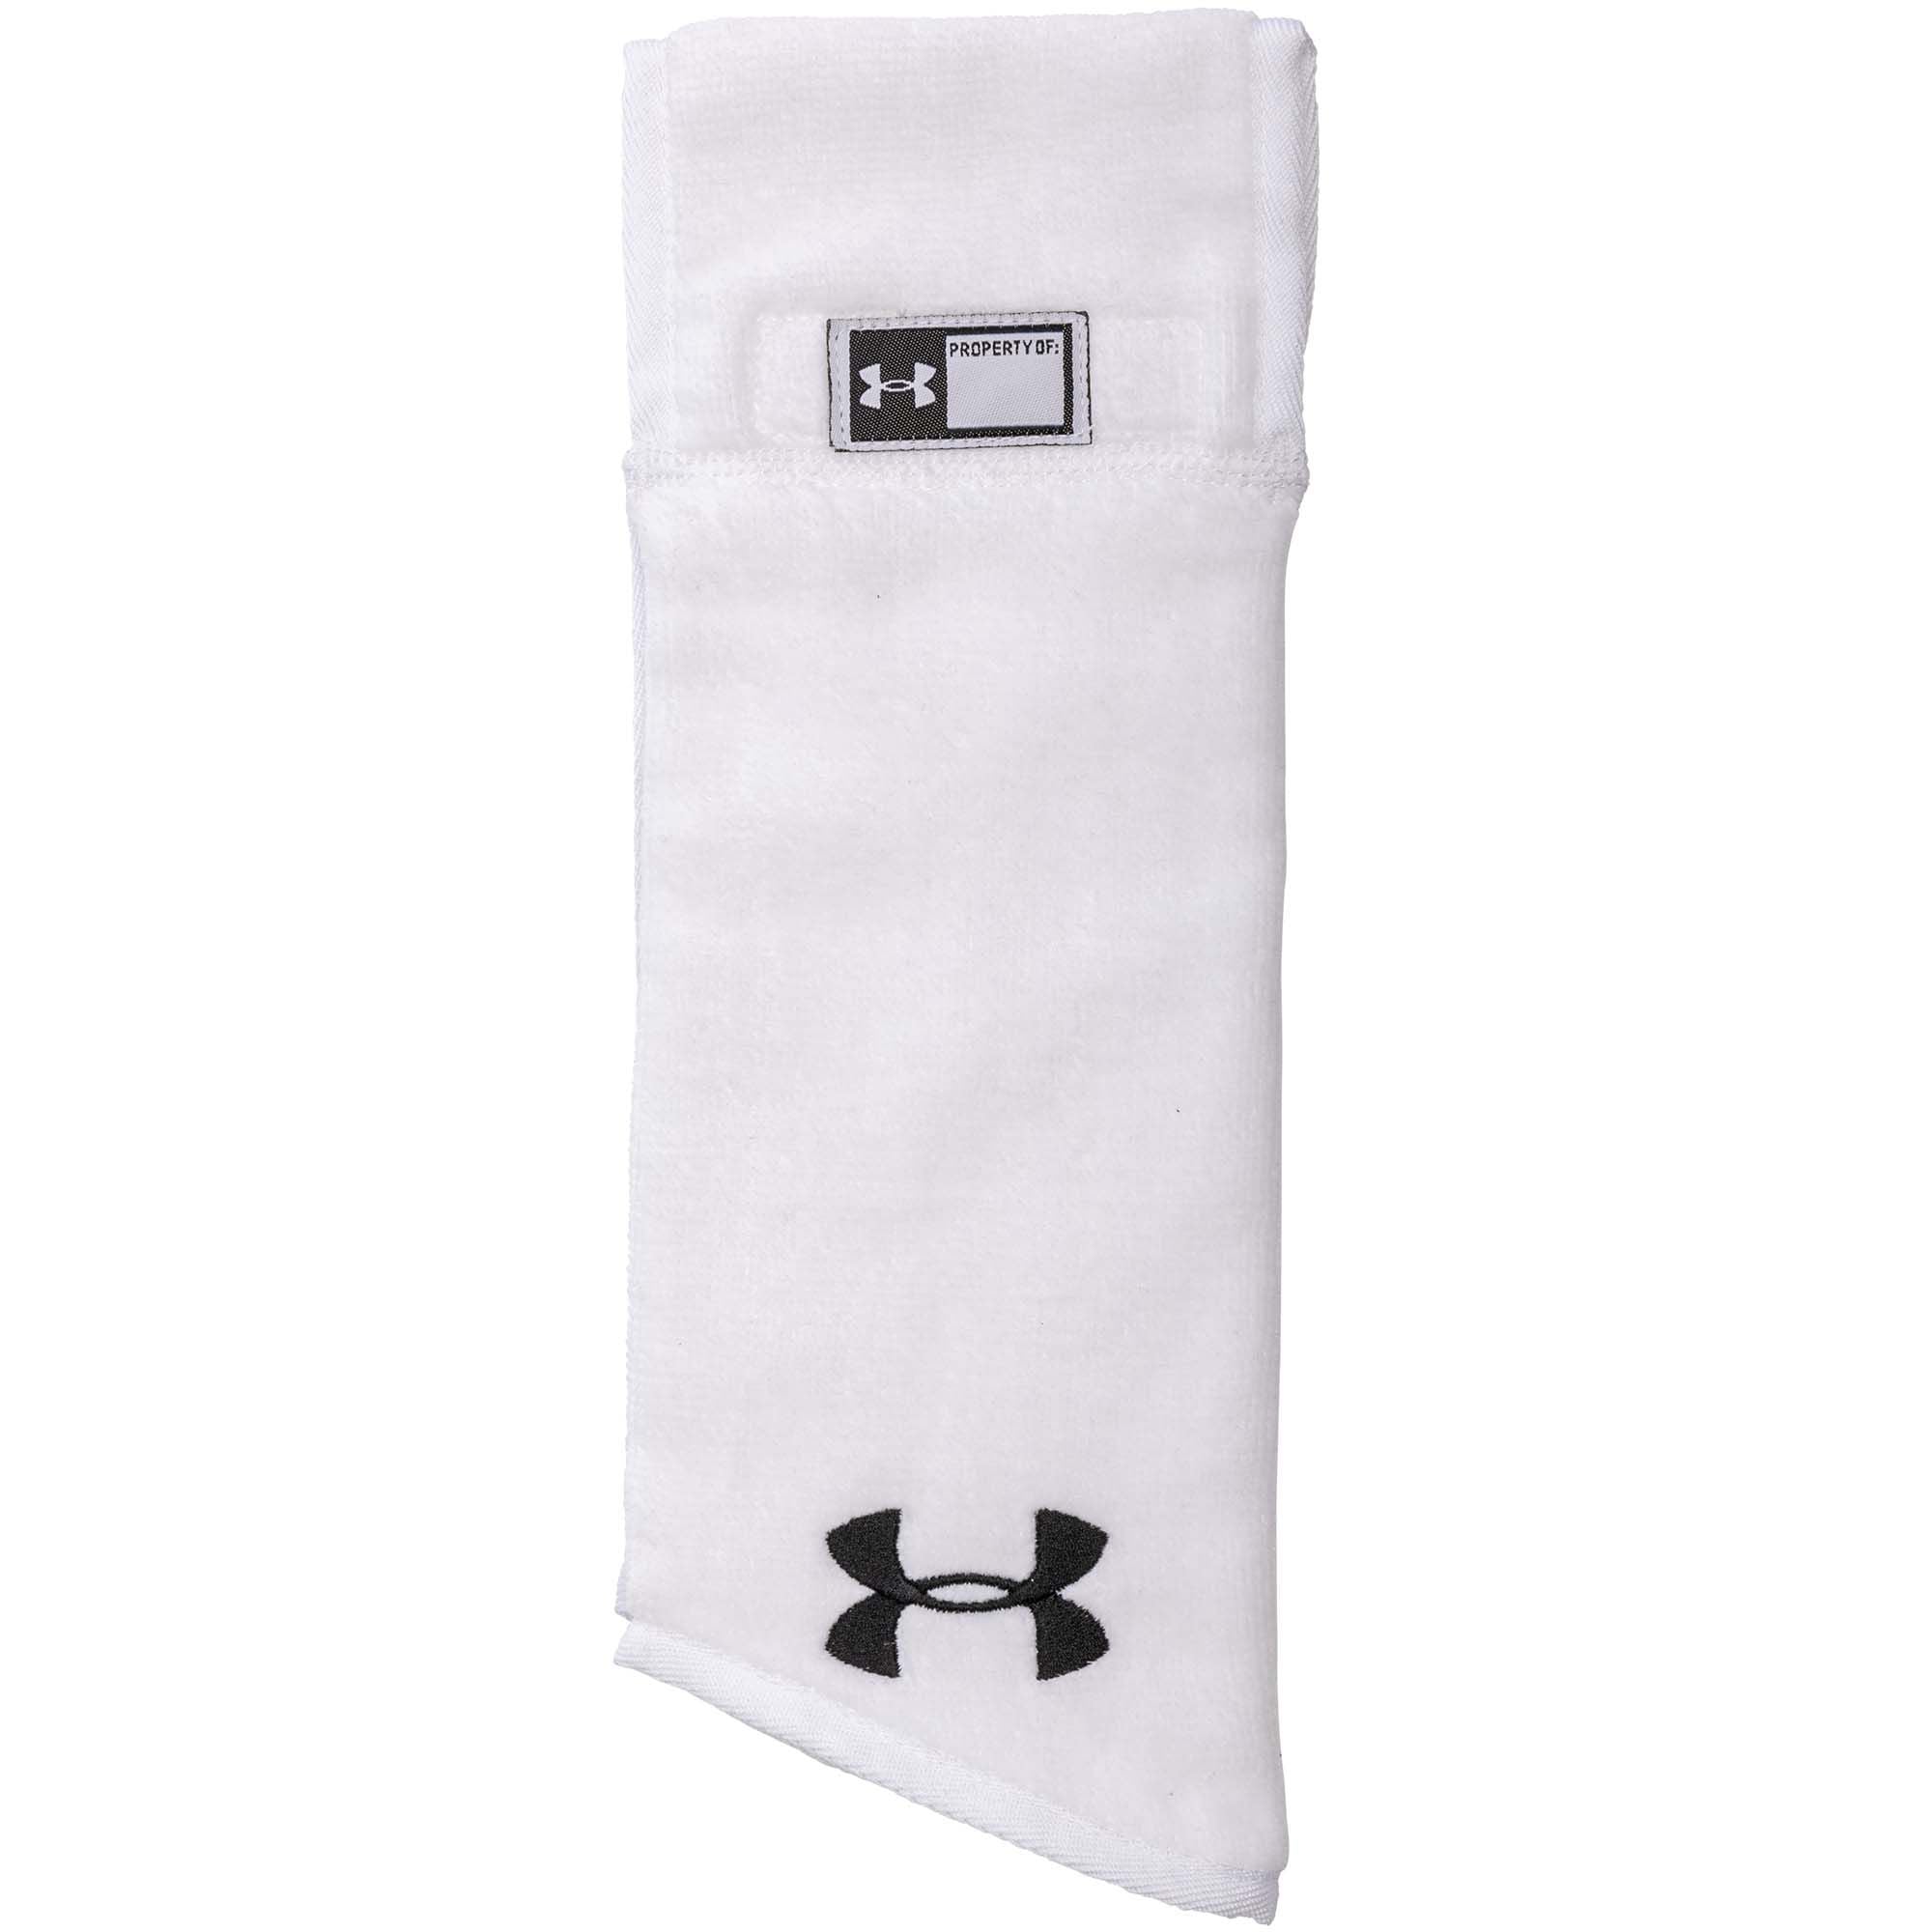 Under Armour Football Towel Accessories United Sports Brands   